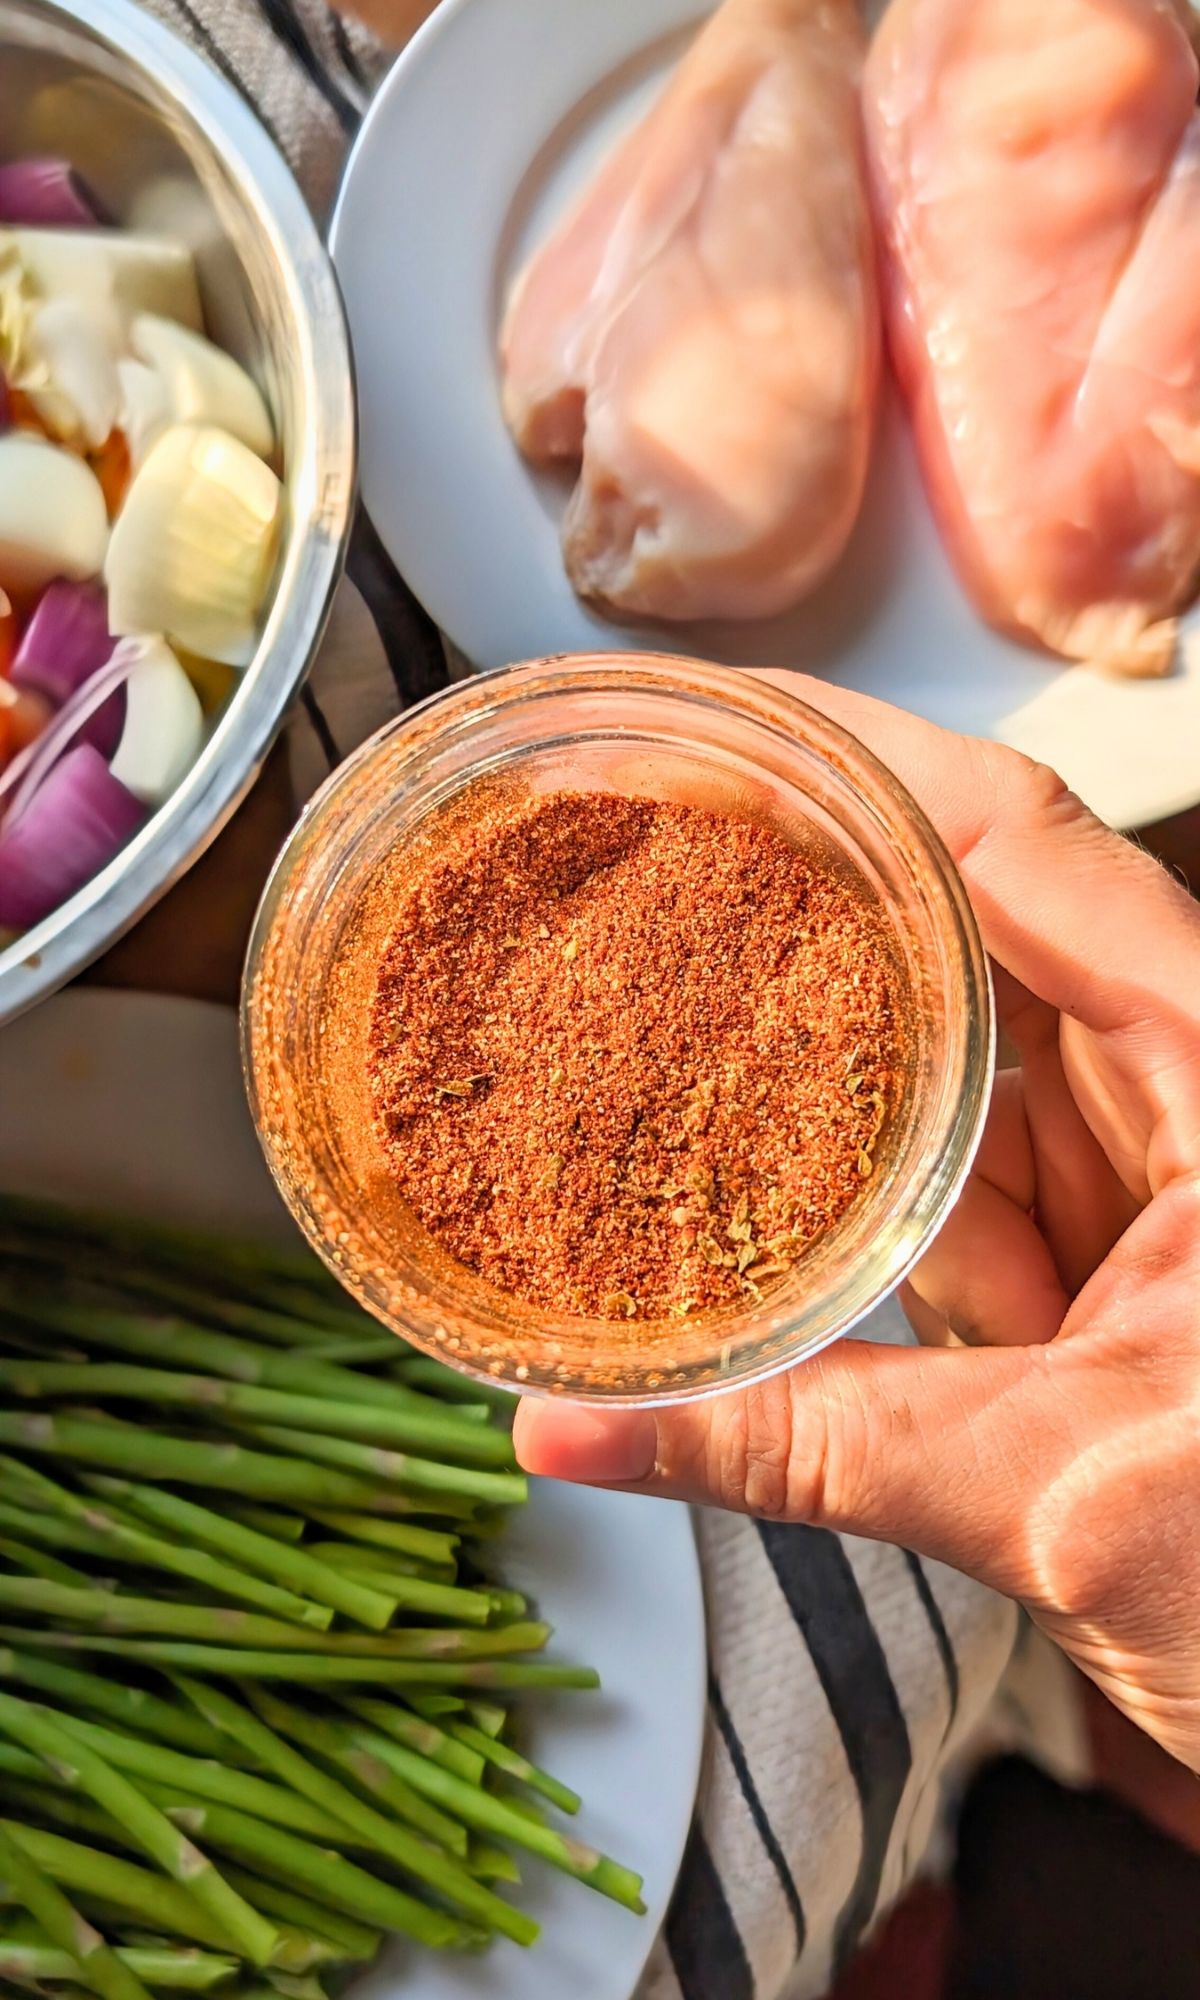 low salt chicken seasoning blend low sodium spices for chicken grilling or baking chicken with no salt added